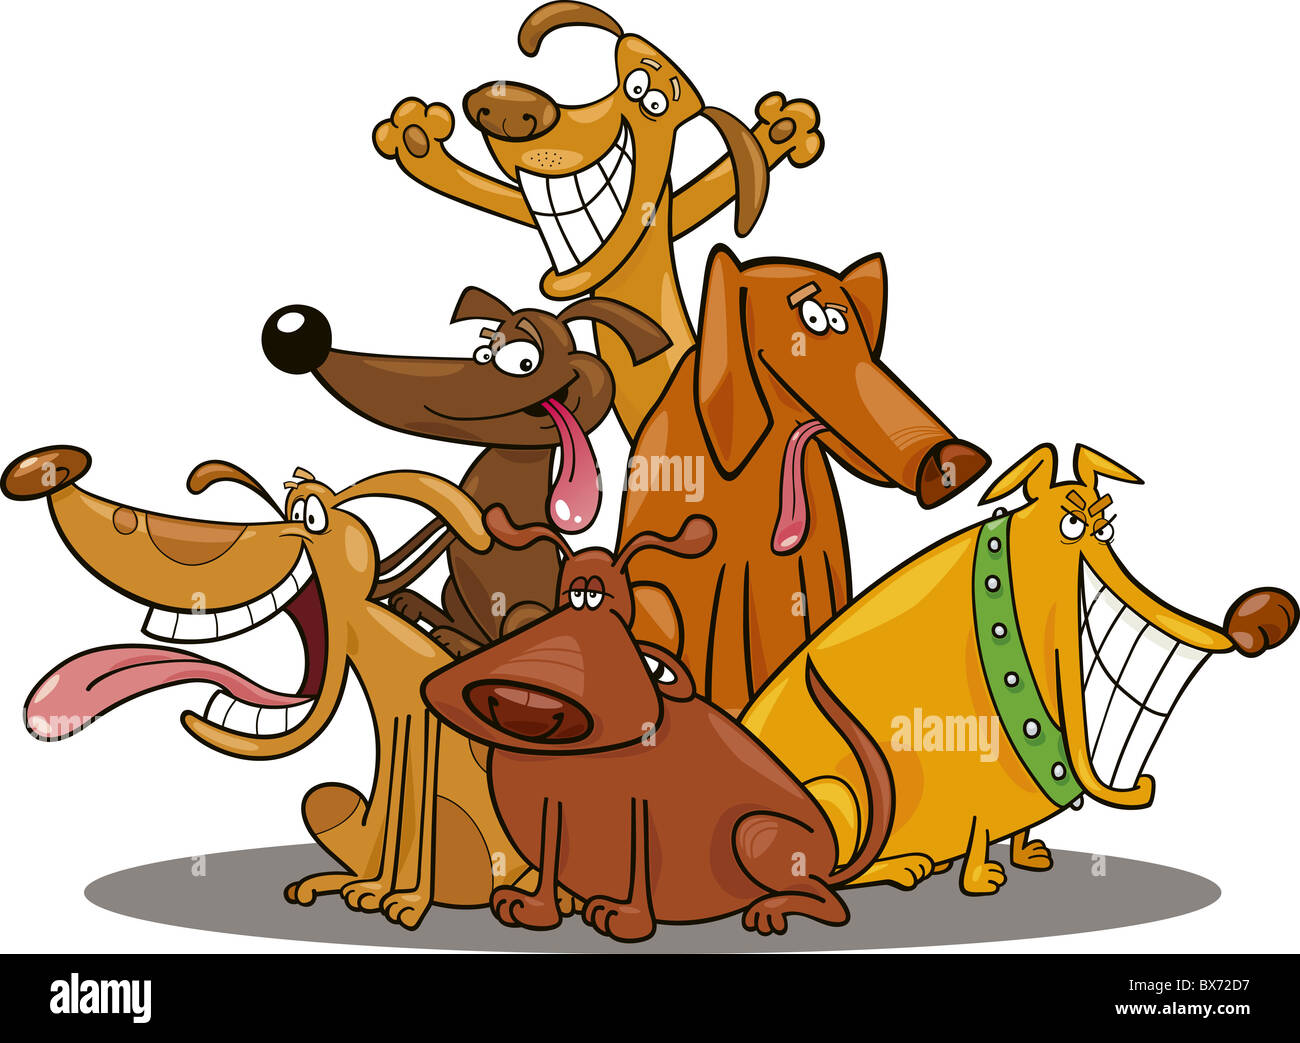 cartoon illustration of funny dogs group Stock Photo